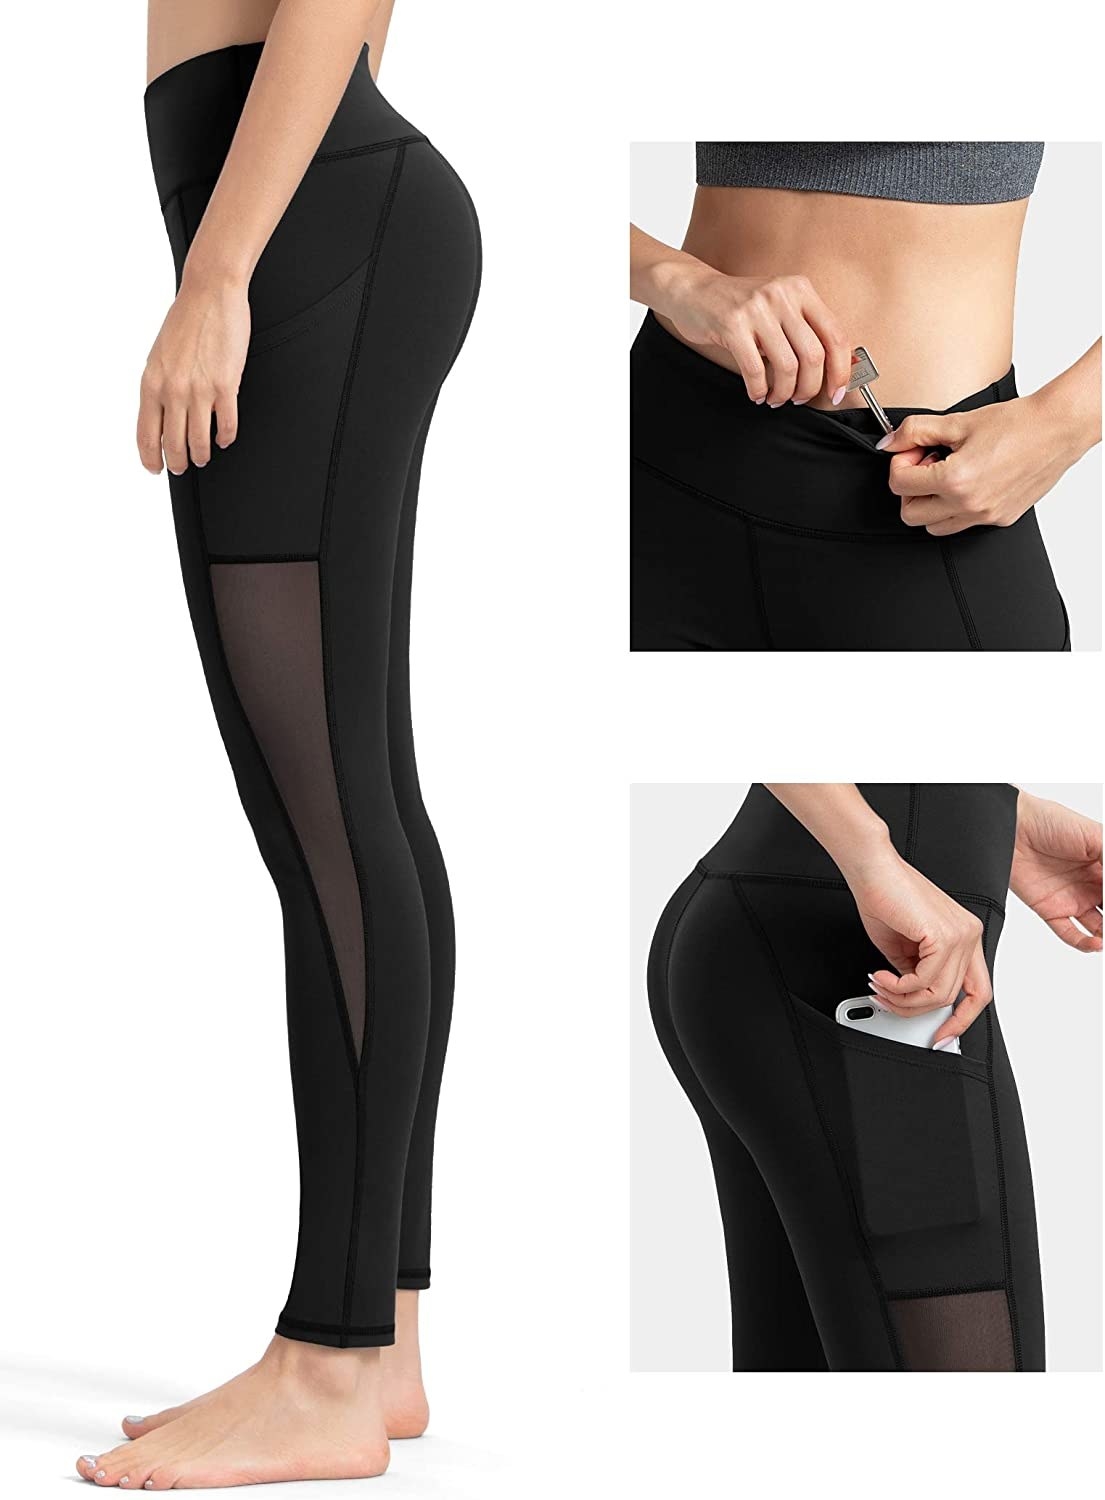 29 Pairs Of Leggings To Add To Your Cart